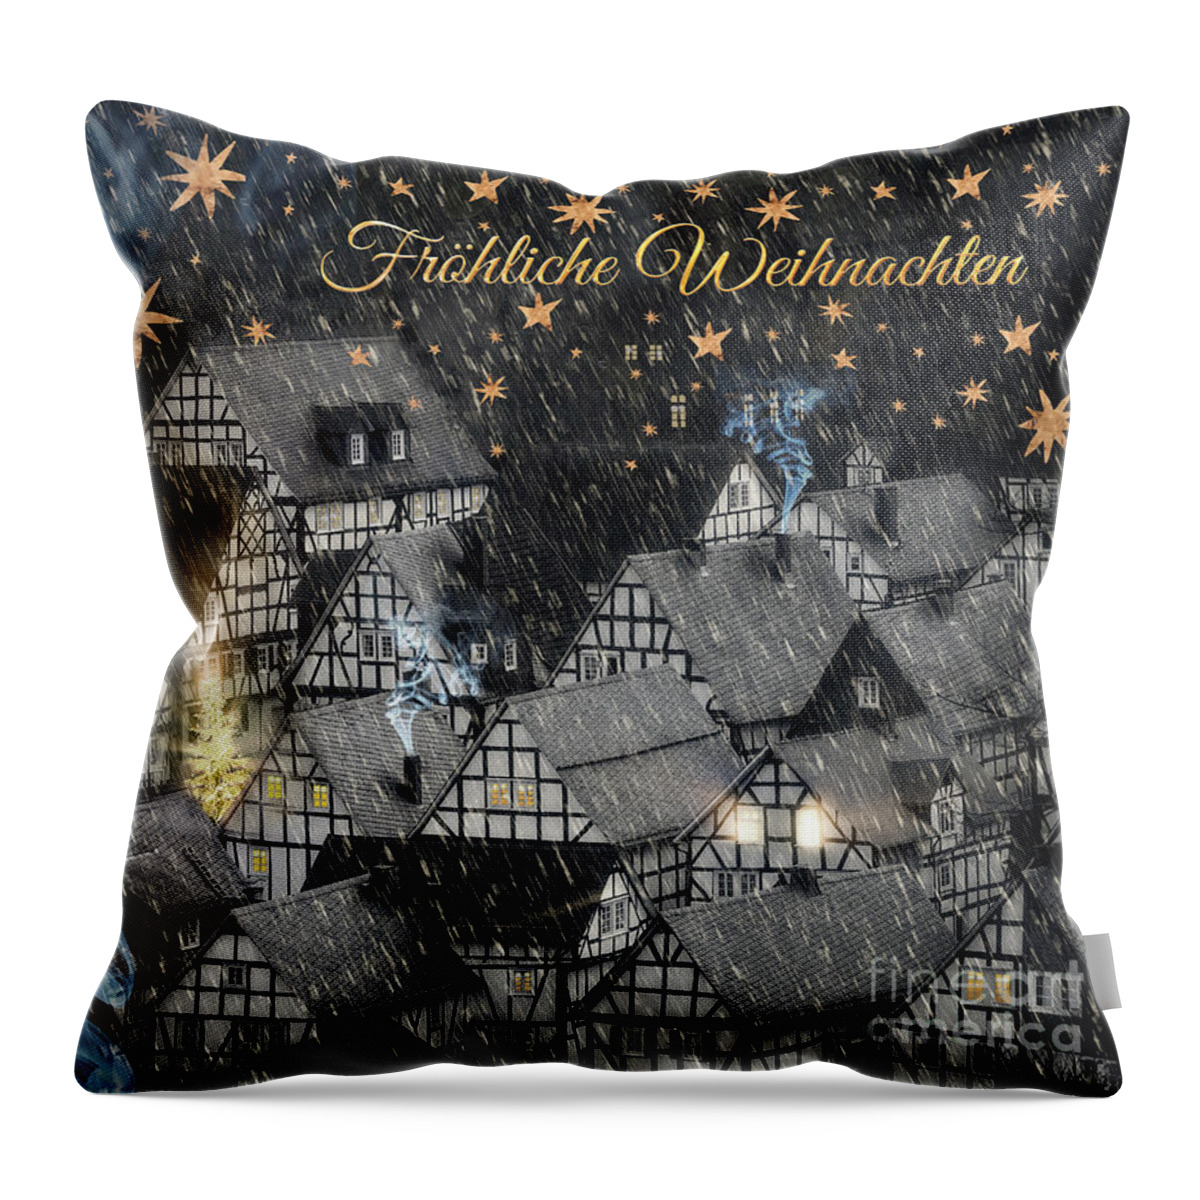 Nag002089dex Throw Pillow featuring the photograph Frohe Weihnachten #1 by Edmund Nagele FRPS